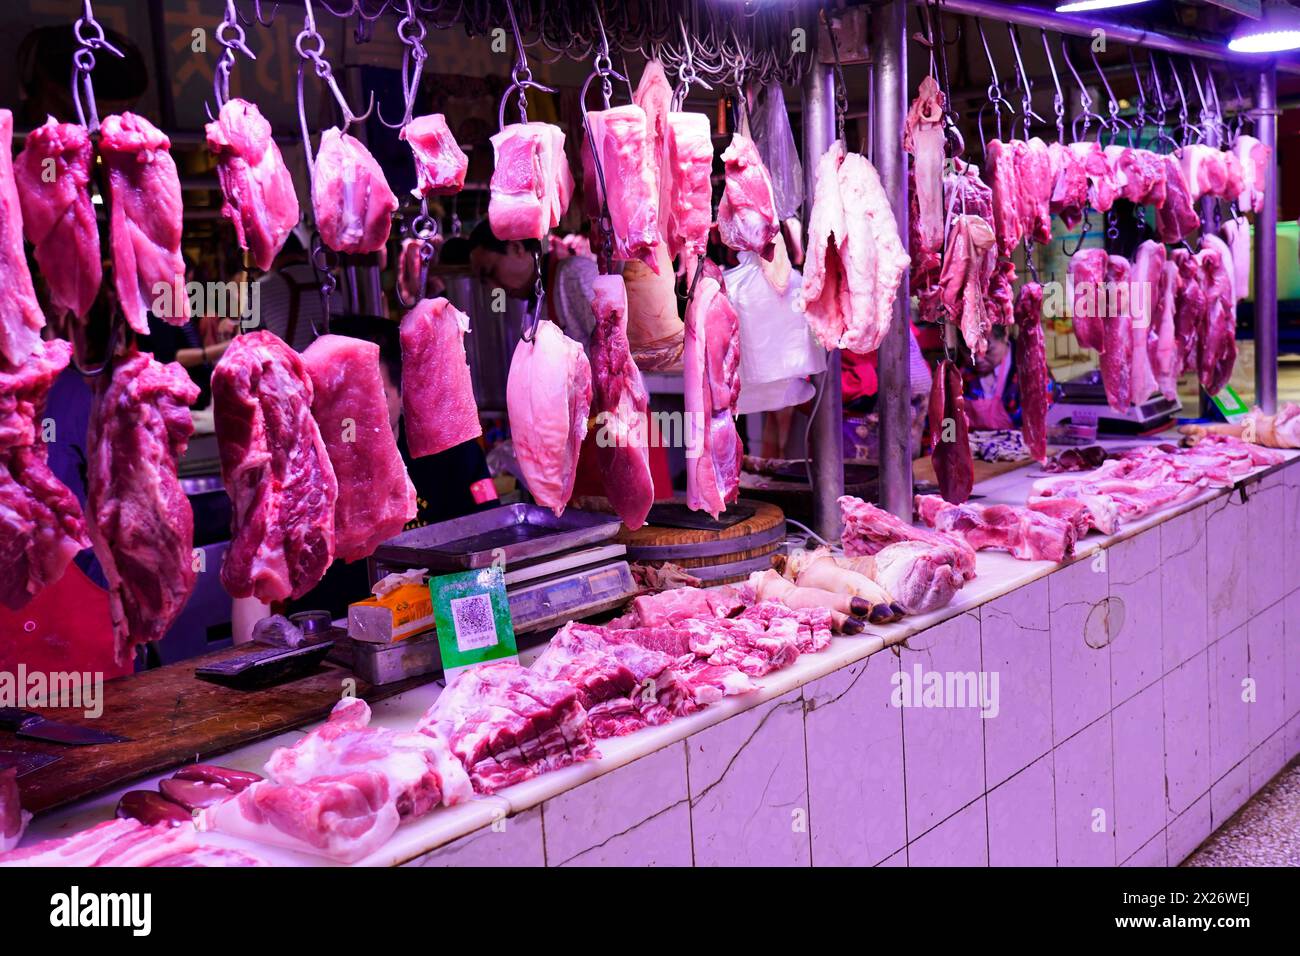 Chongqing, Chongqing Province, China, Pieces of meat hanging on hooks in an internally lit market stall, Chongqing, Chongqing Province, China Stock Photo